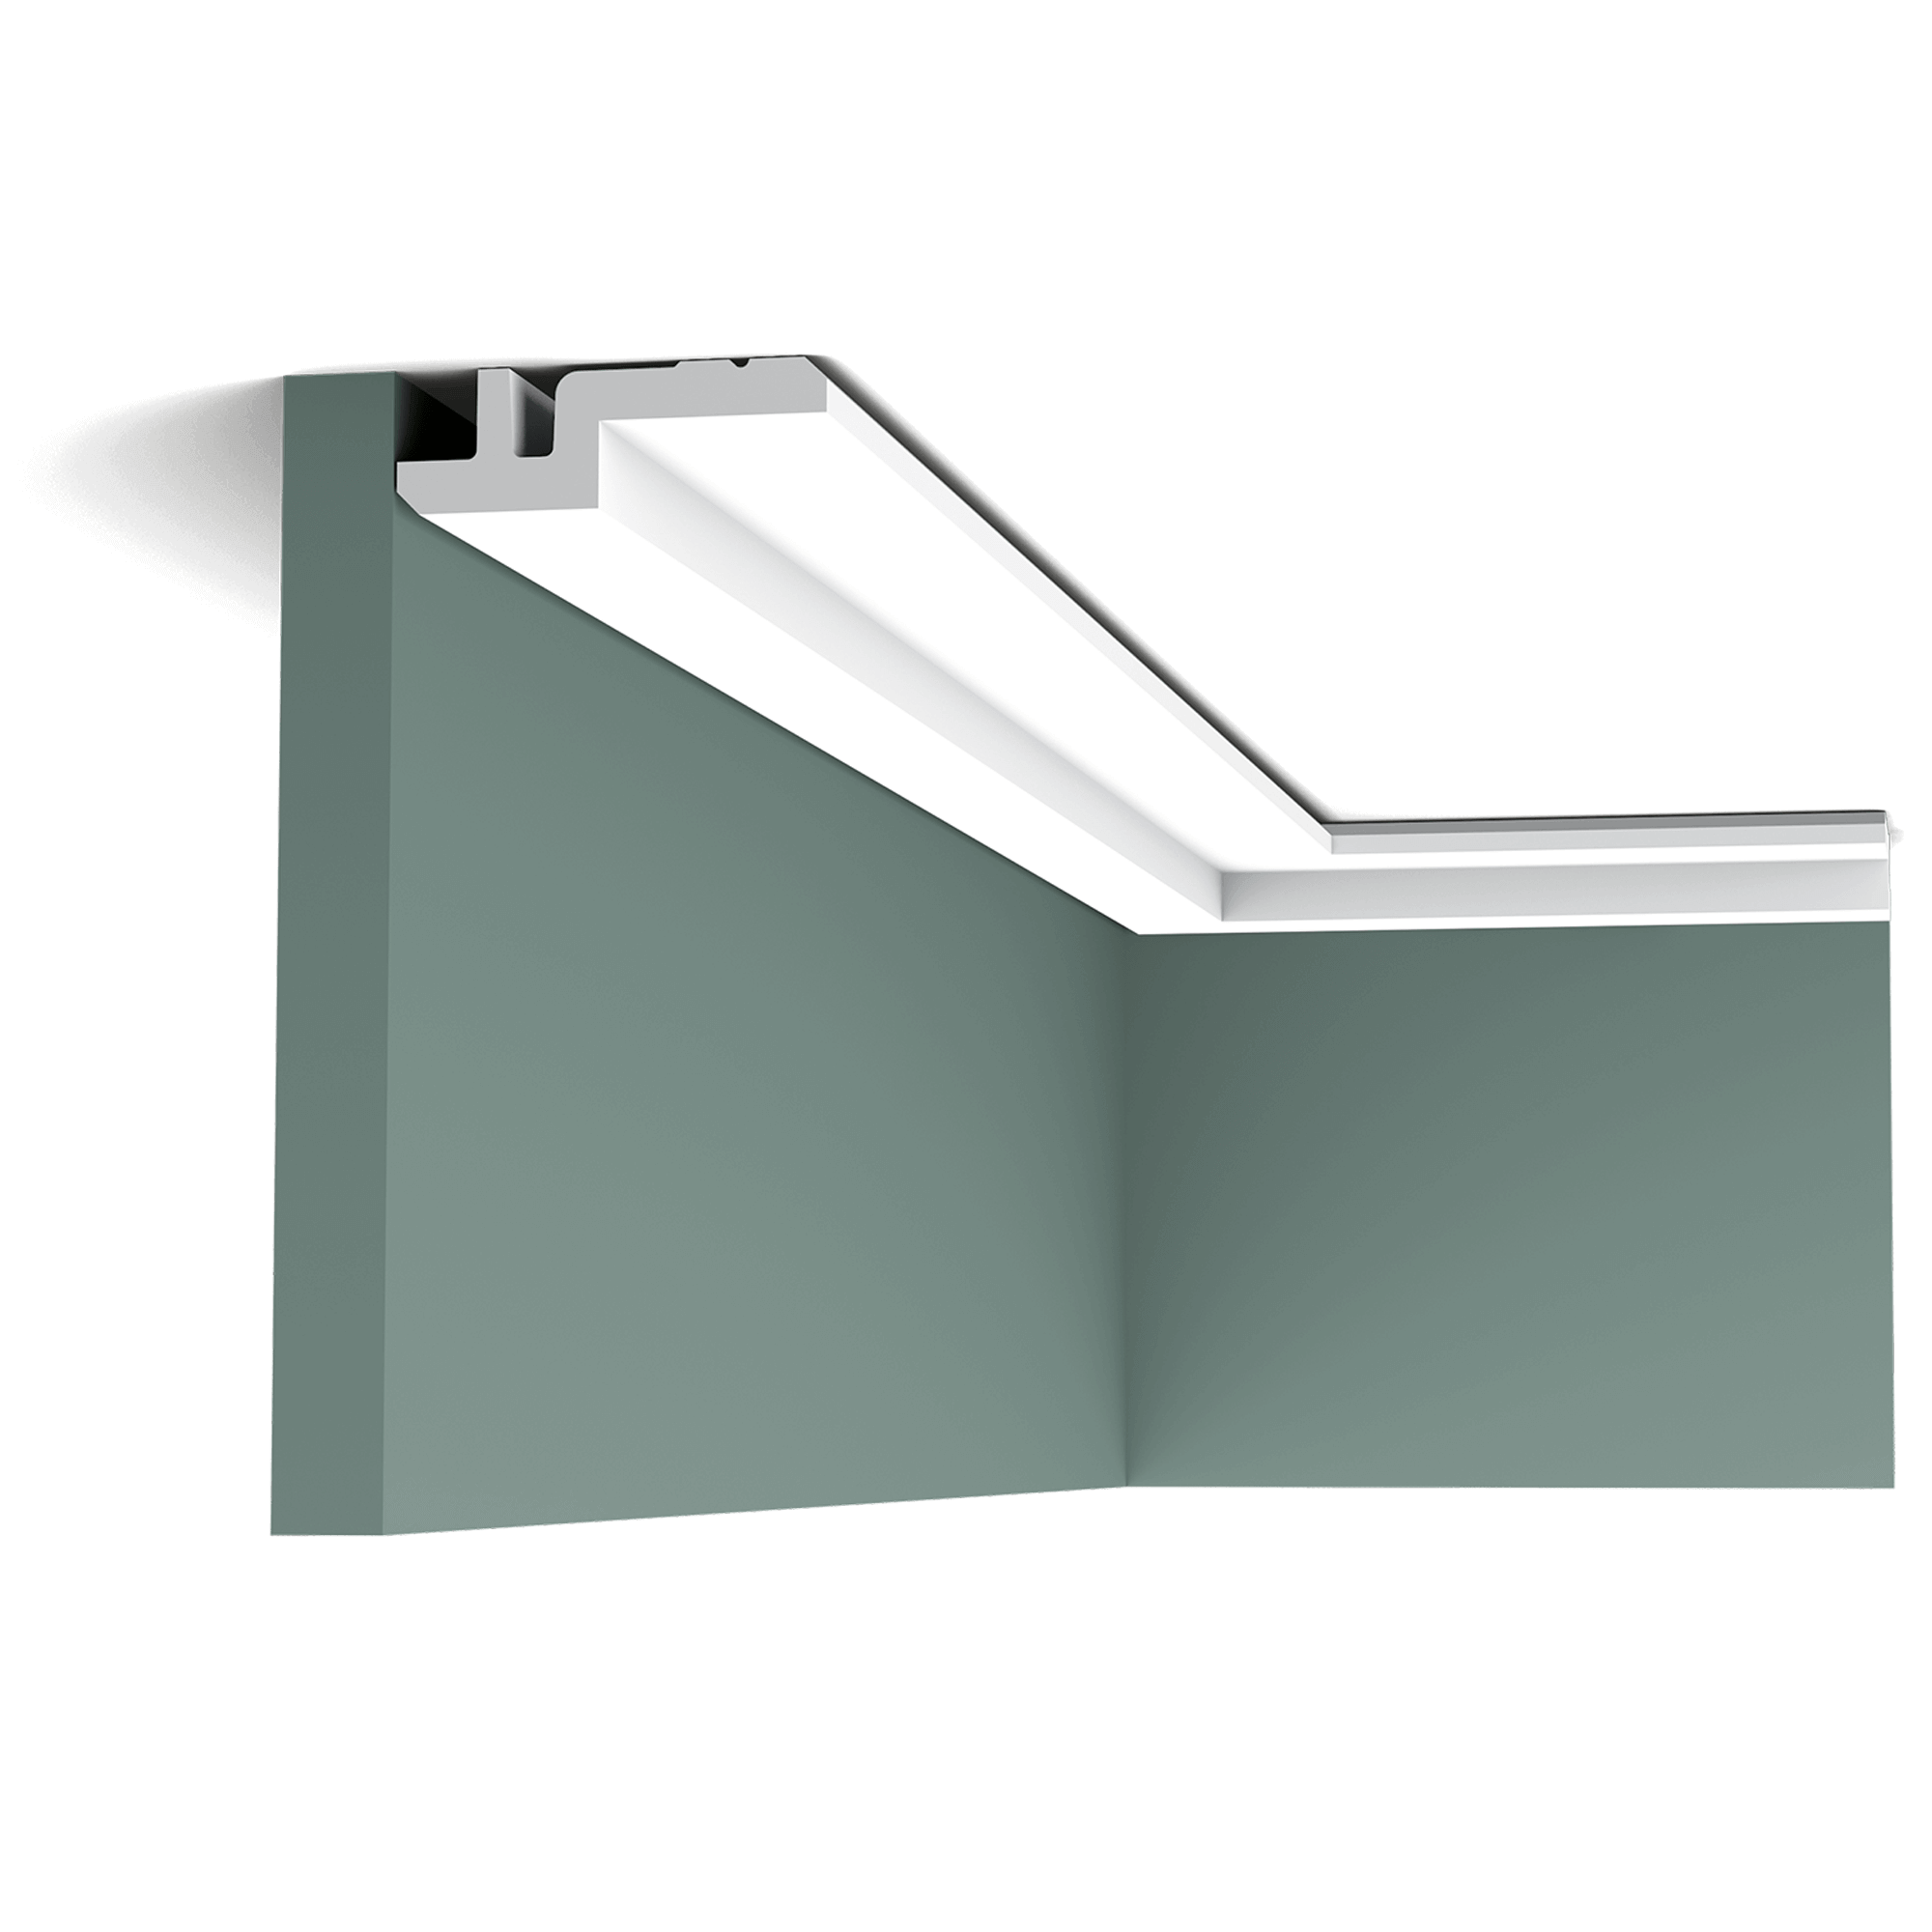 c394 cornice moulding 89ca A clean, modern profile from the Steps range. Here we fix the largest section to the ceiling, making the space seem wider. The angled corners above and below provide additional subtle shadow lines. Designed by Orio Tonini.